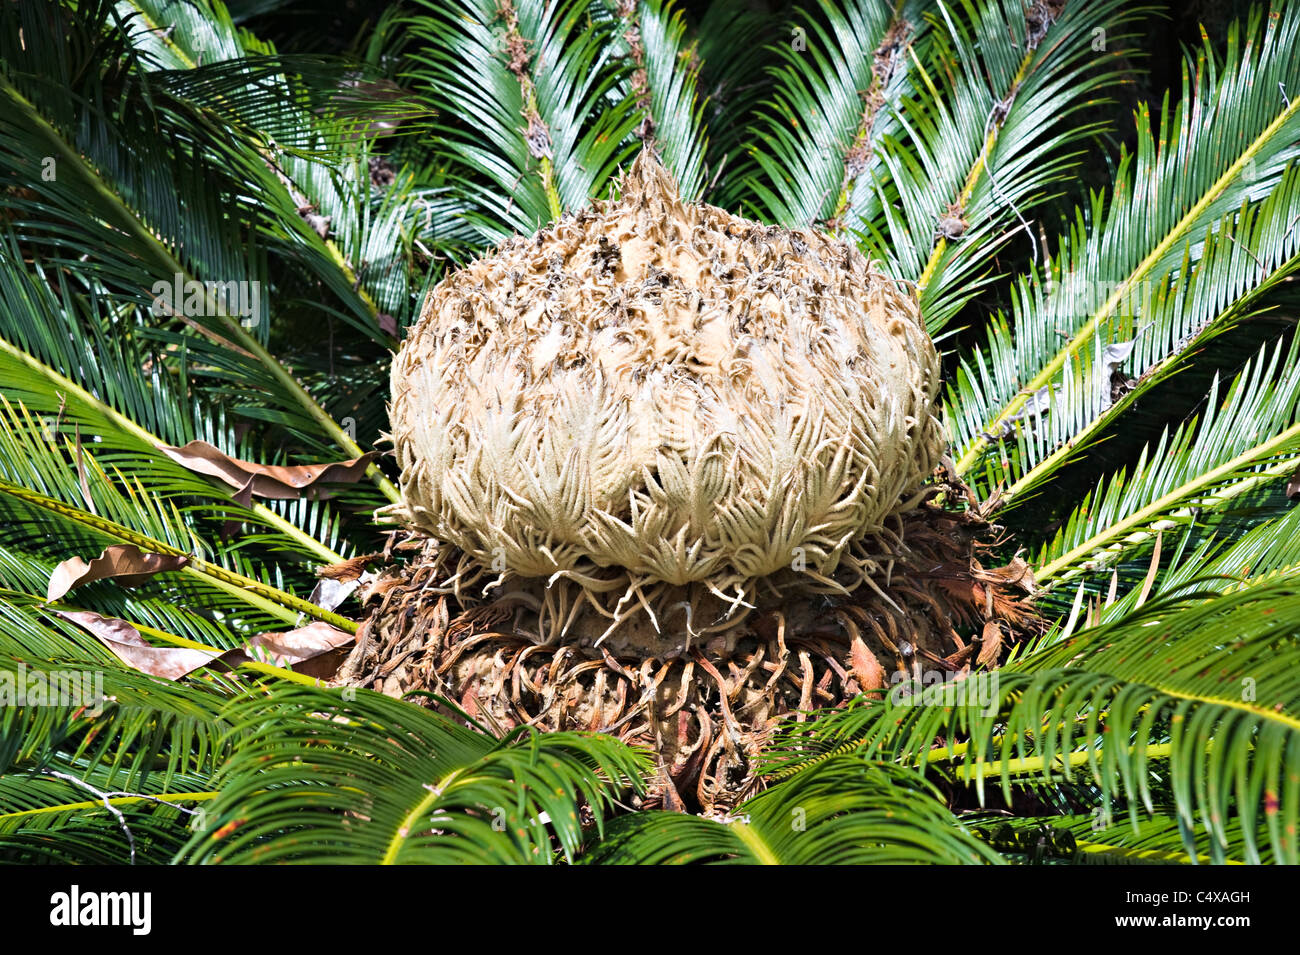 A Flower of the Cycas Thouarsii Madagascar Cycad Plant Growing in Royal Botanic Garden Sydney New South Wales Australia Stock Photo